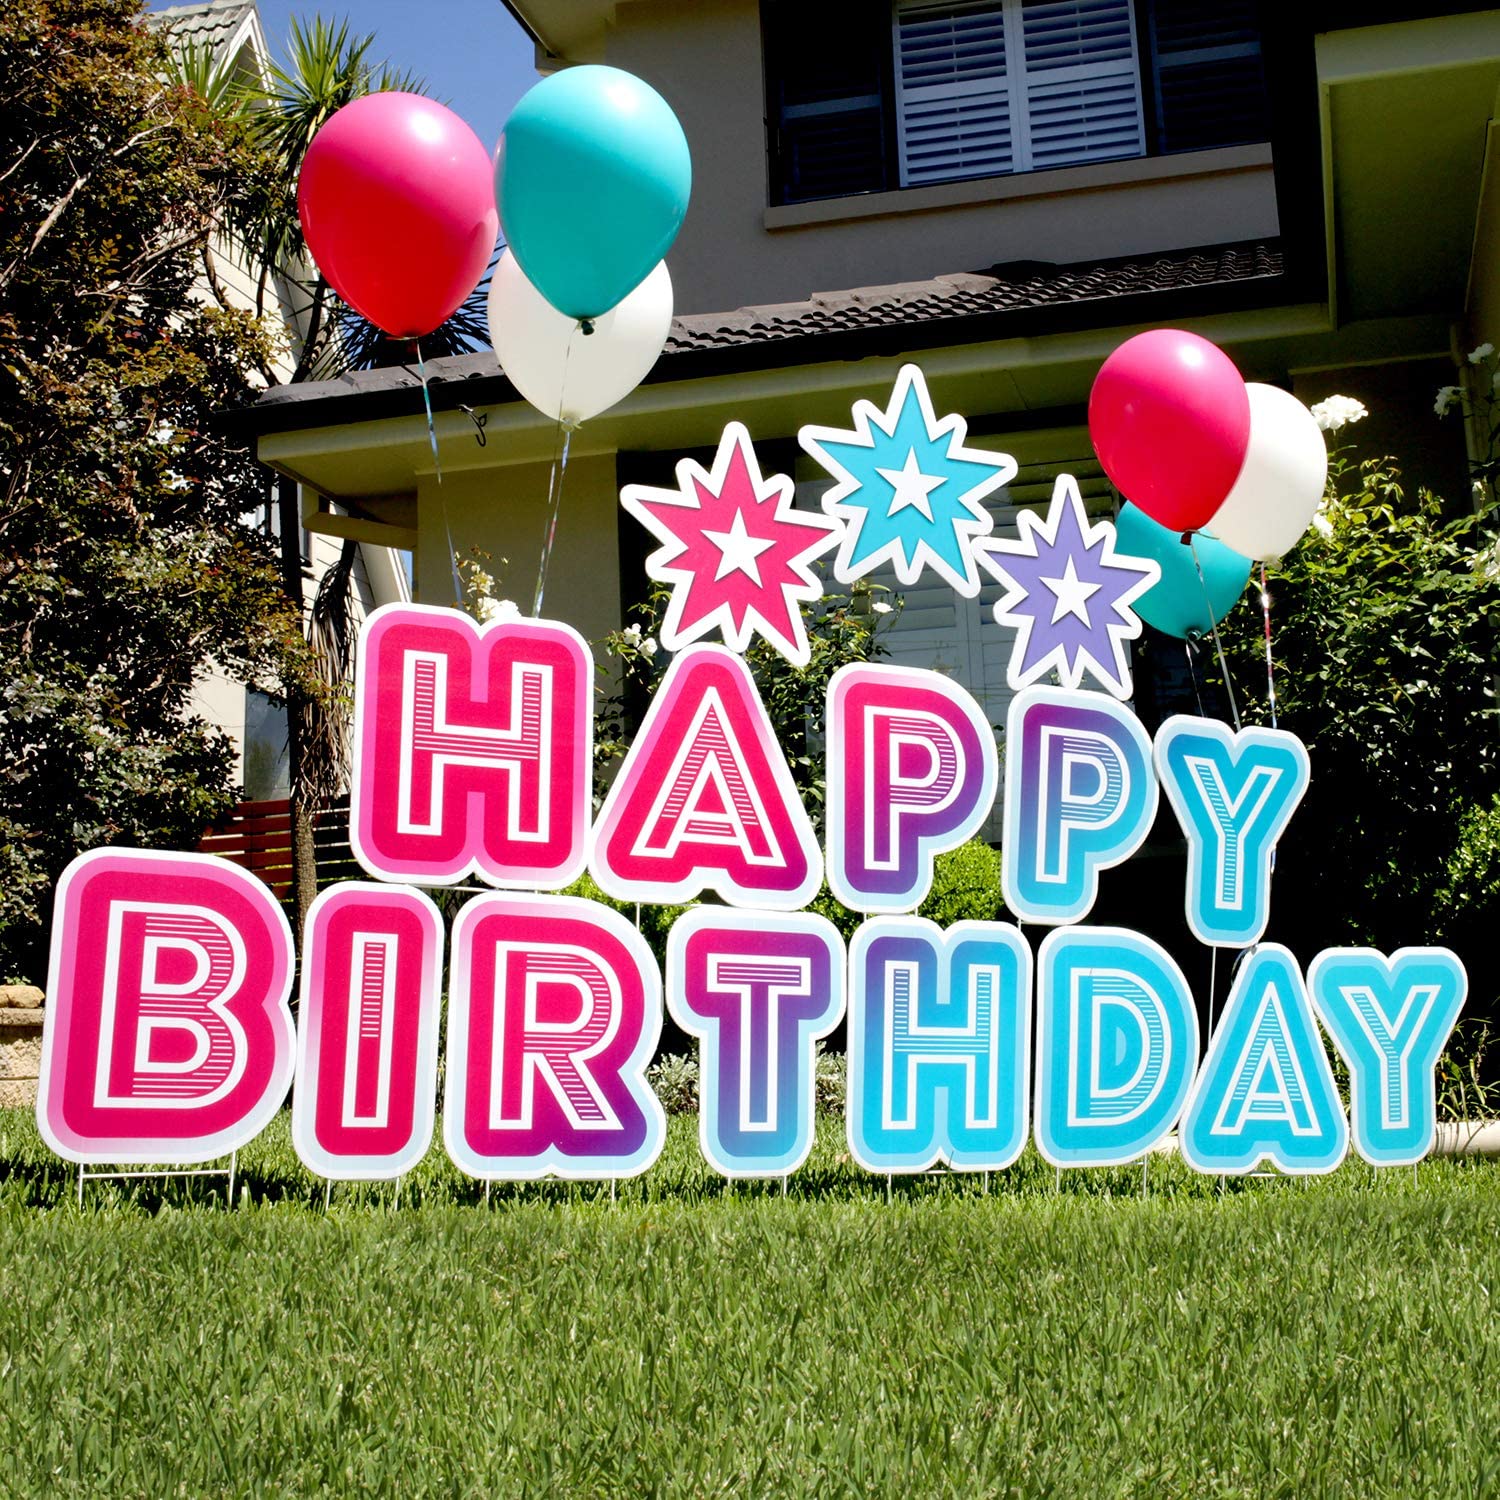 Happy Birthday Yard Sign Set 3-in-1 Stacking Birthday Lawn Letters Easy Install Reusable Happy Birthday Yard Signs with Stakes and Stars (46 x 160 inches) Featured Image